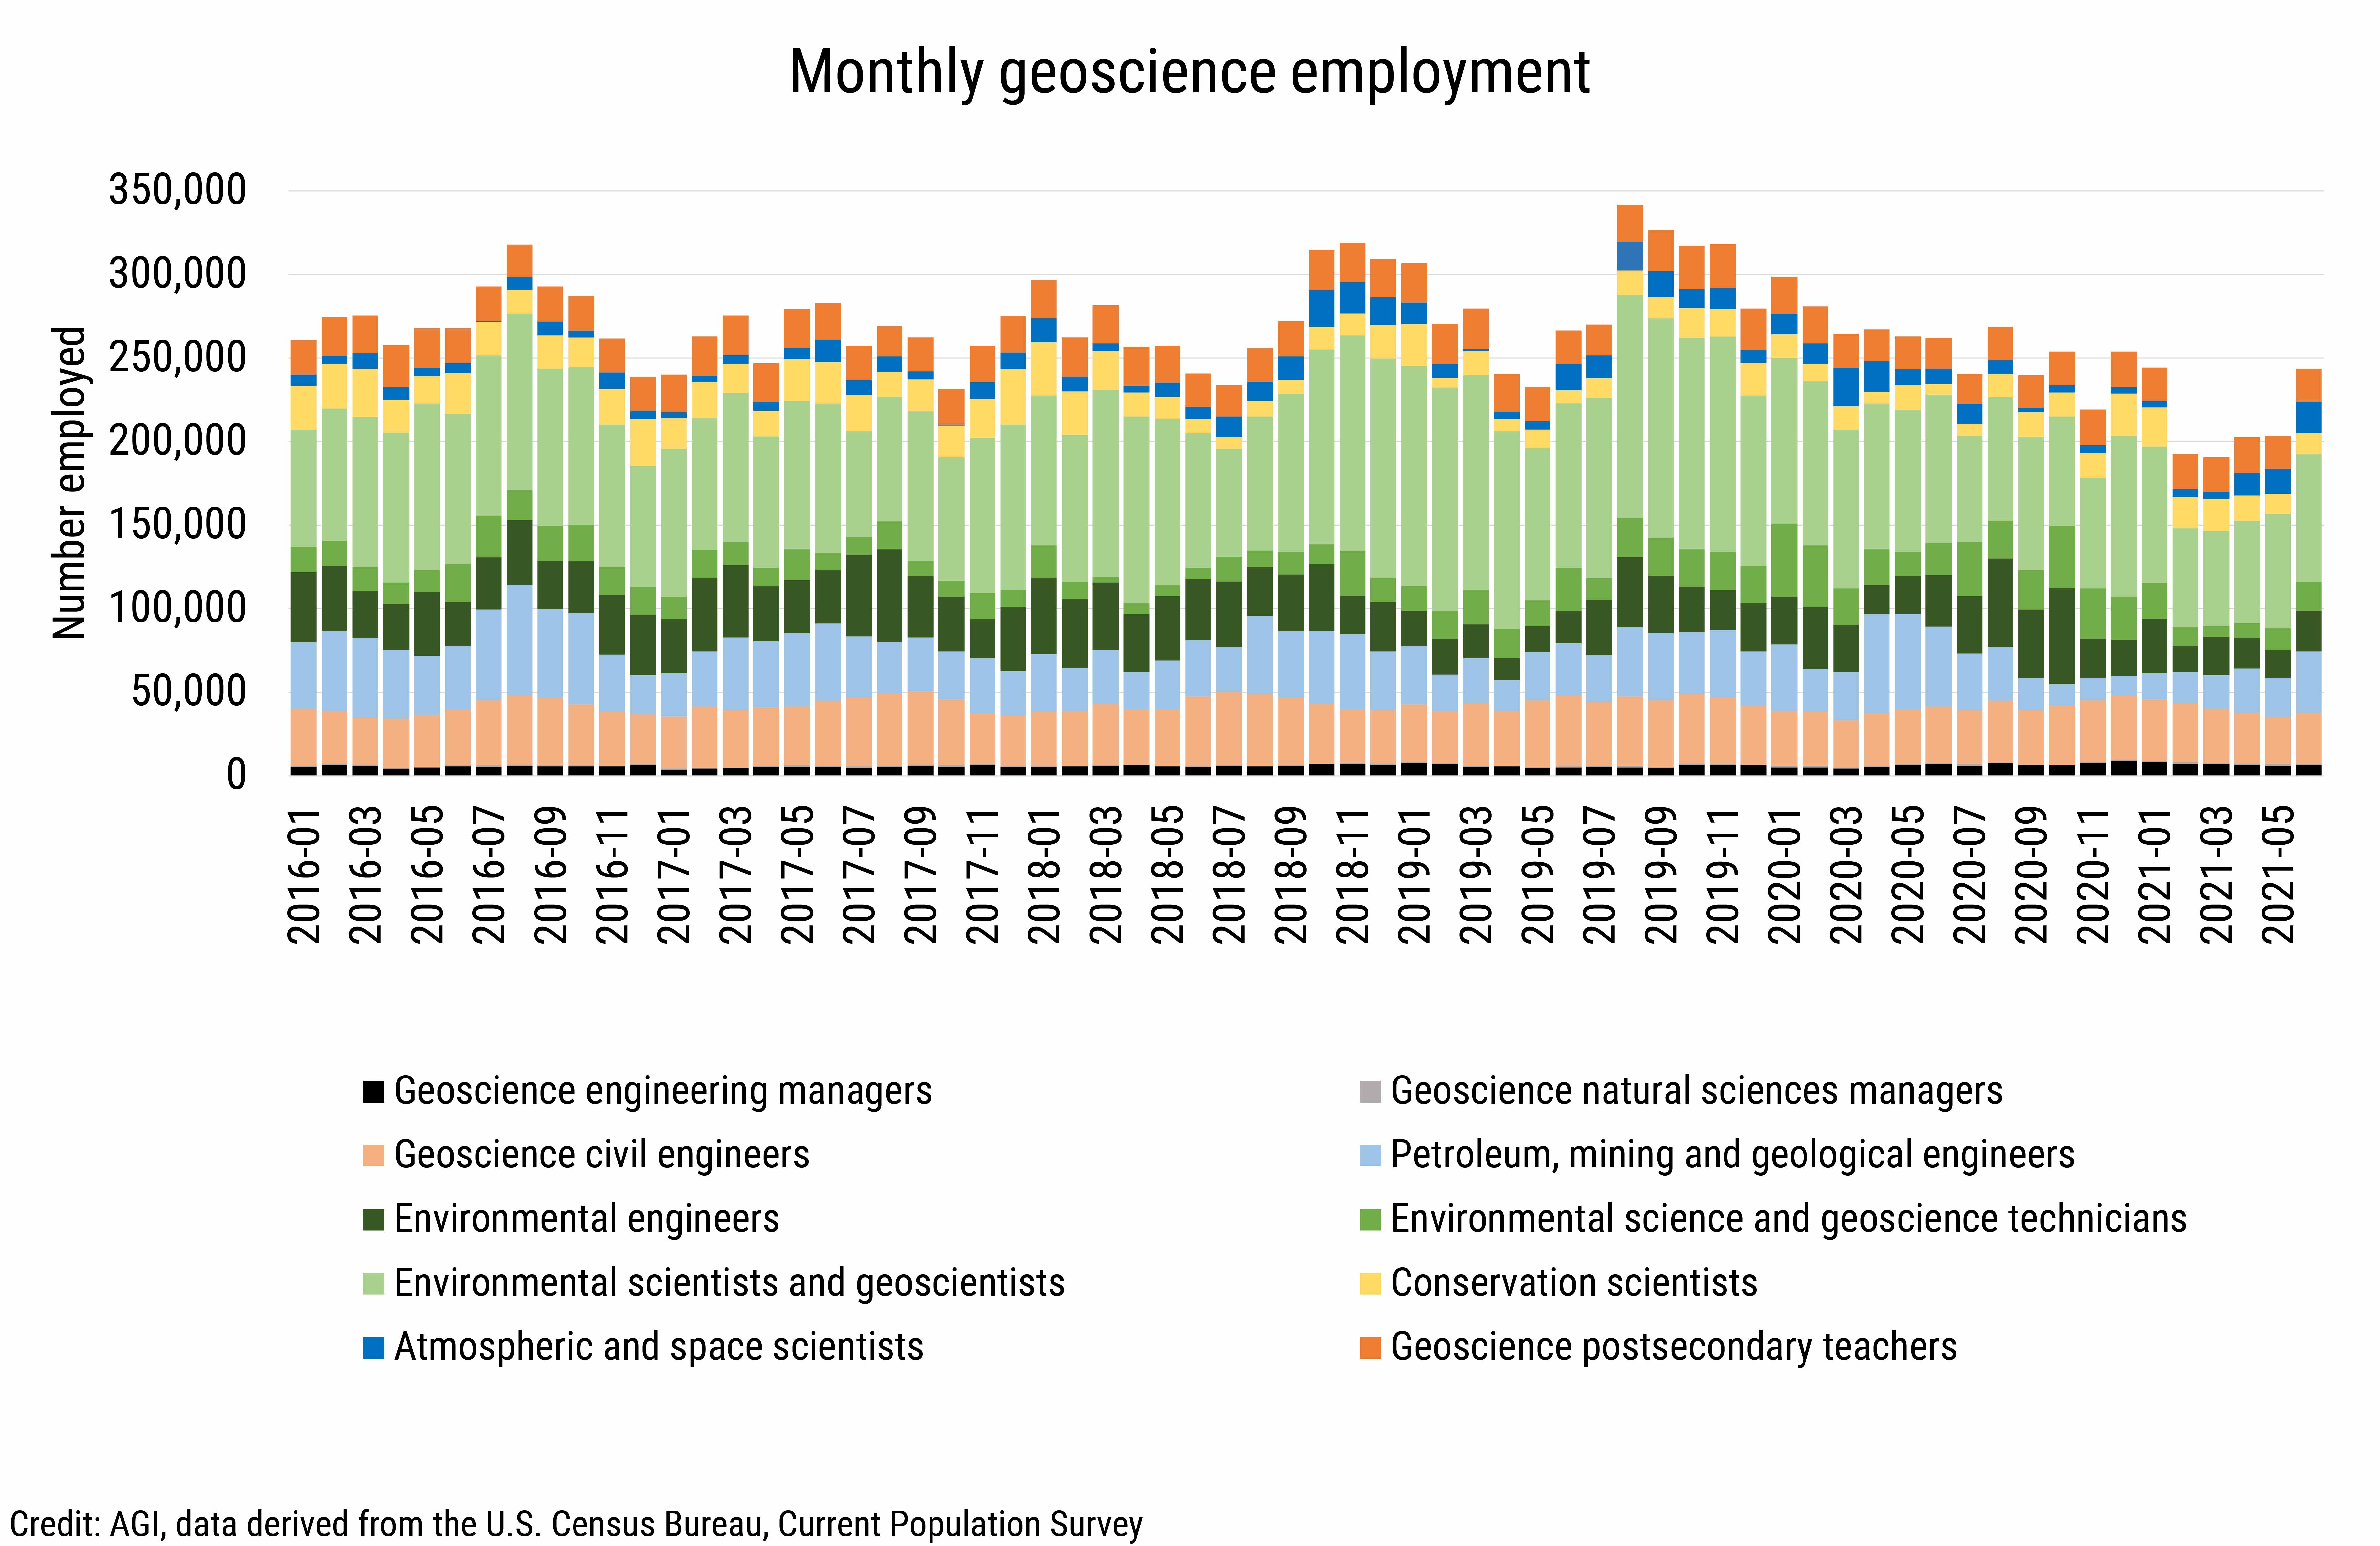 DB_2021-023 chart 01: Monthly geoscience employment (Credit: AGI, data derived from the U.S. Census Bureau, Current Population Survey)